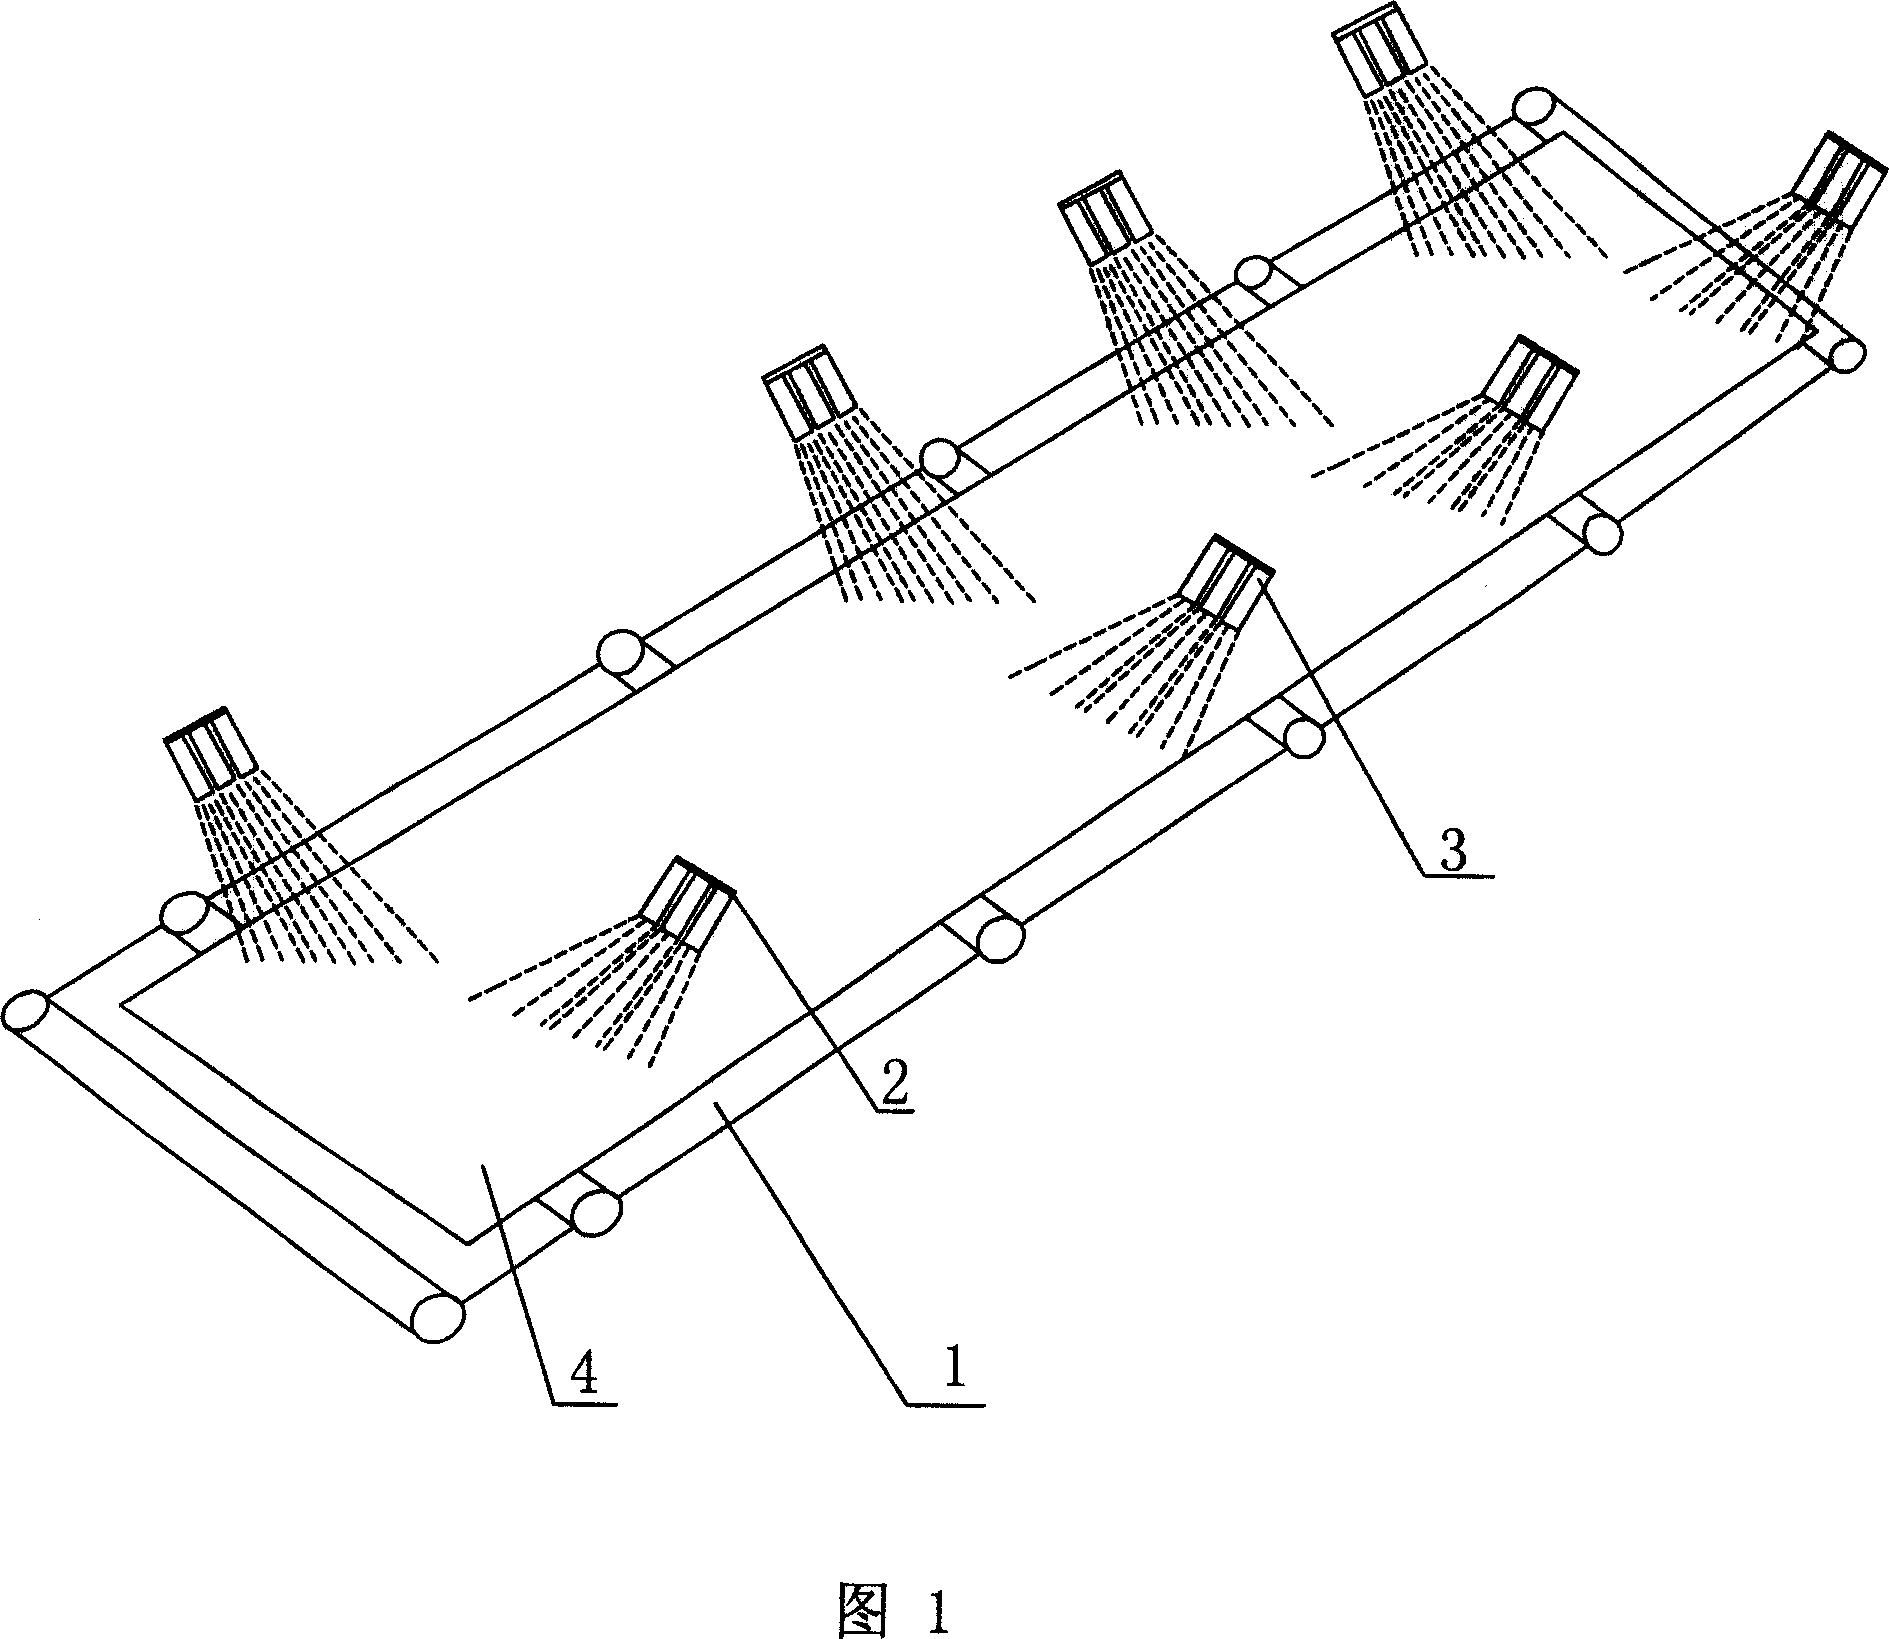 Laminated flowing cooling water side-jetting sweeping system after high-strength low-alloy steel being rolled